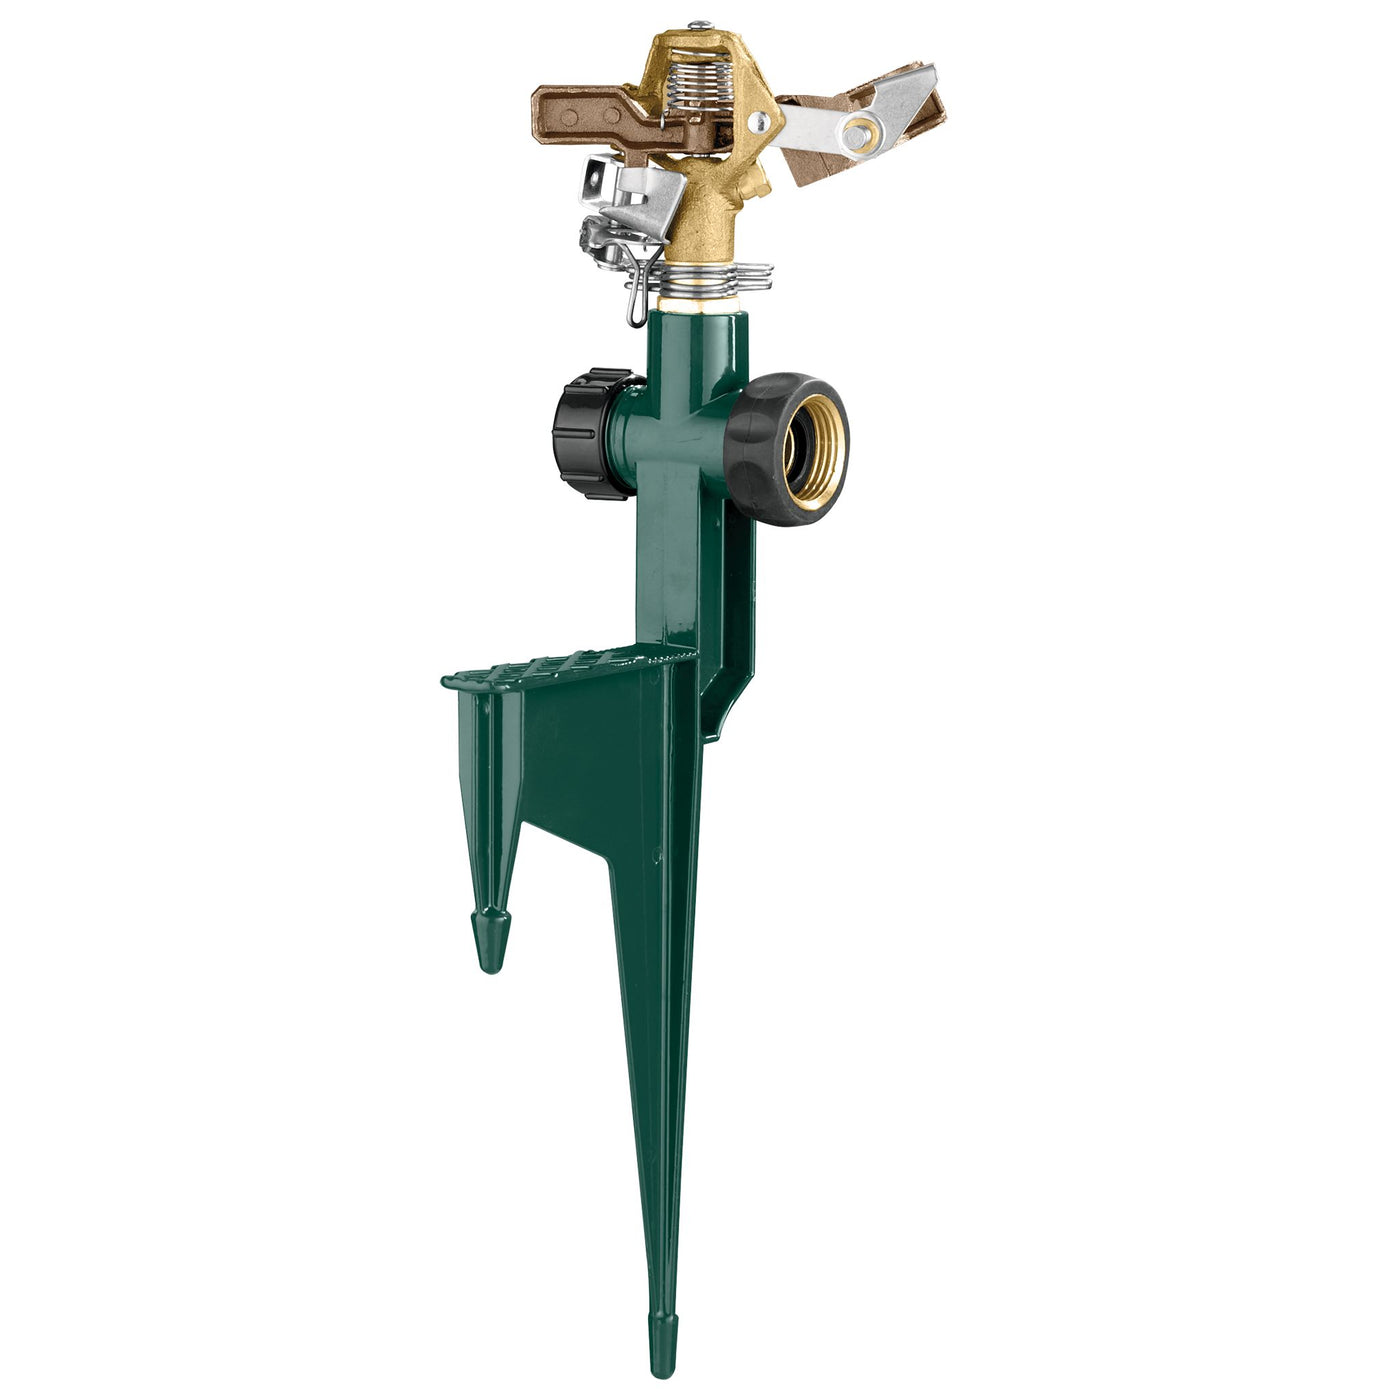 Half inch brass impact sprinkler on green metal step spike with hose end flow through outlet.